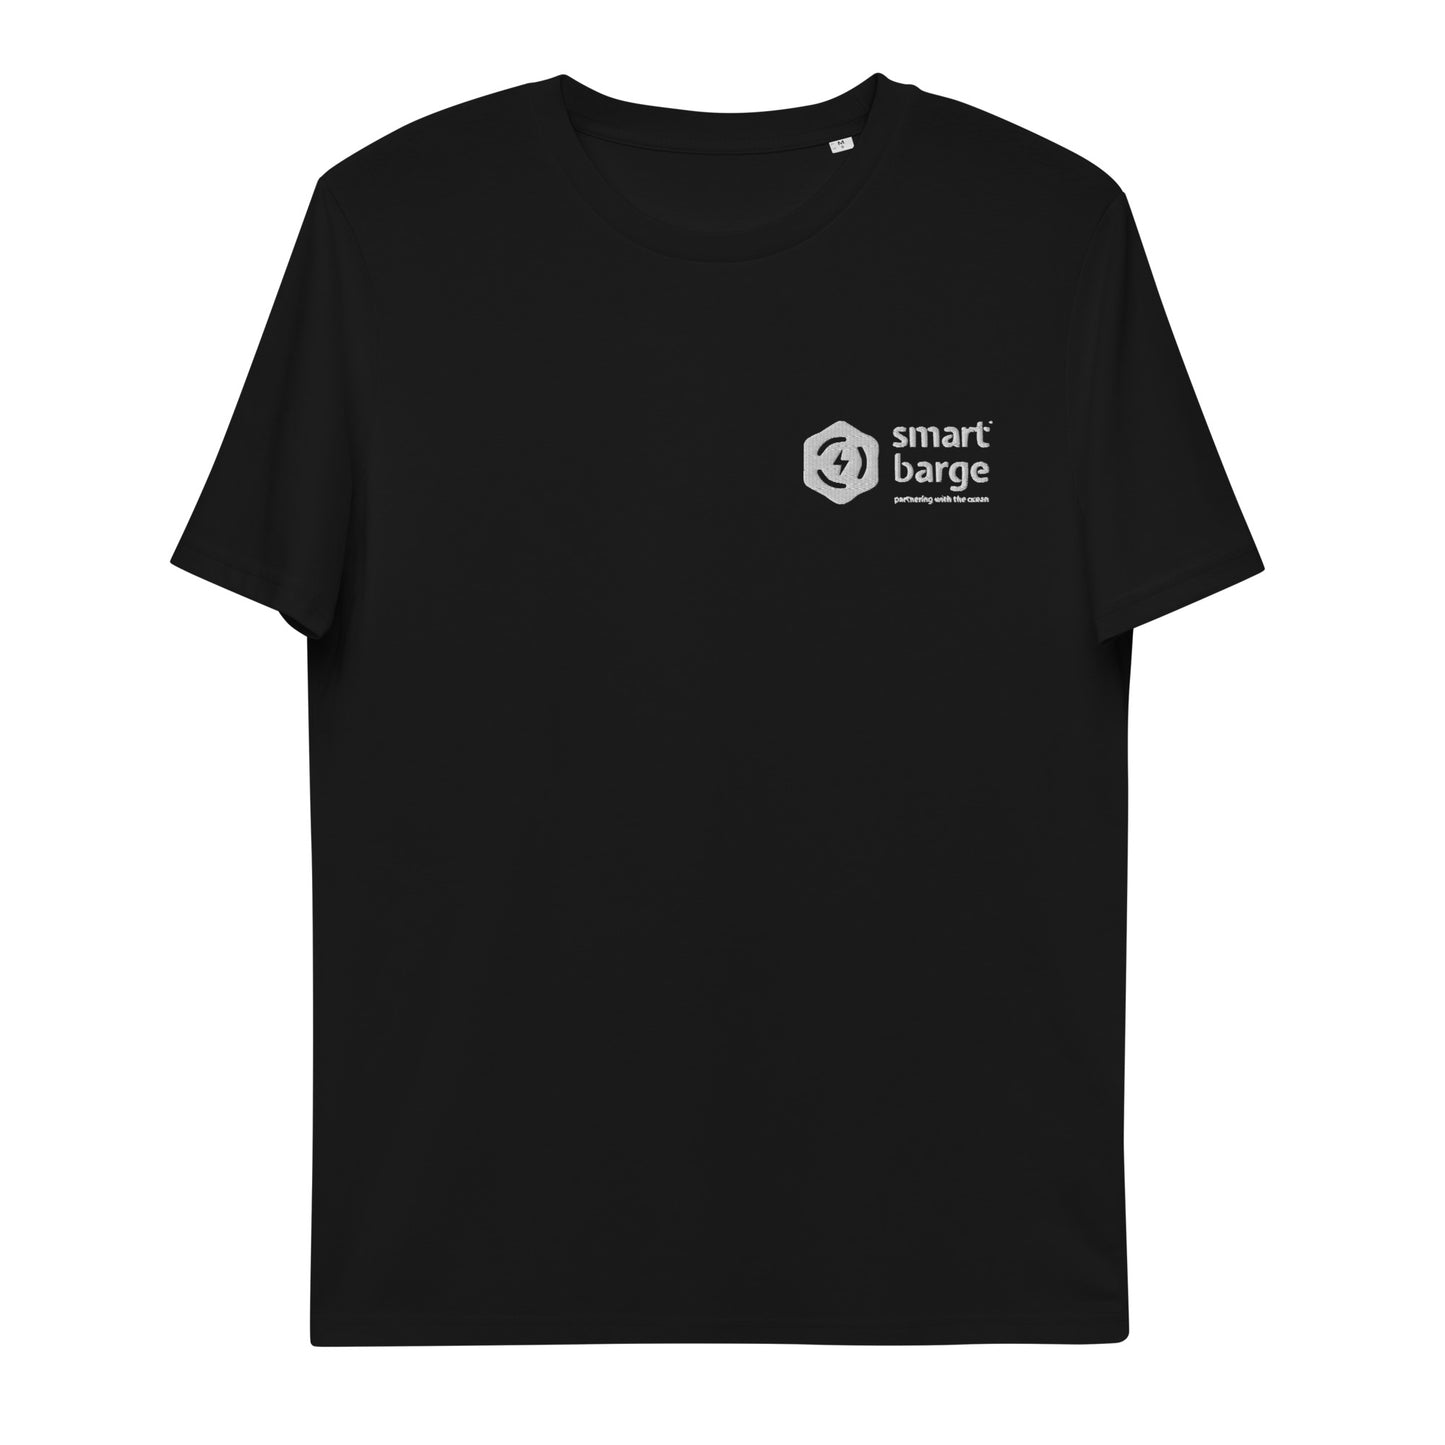 [UK-Delivery] Smart Barge 'Partnering With The Ocean' Unisex Organic Cotton T-shirt